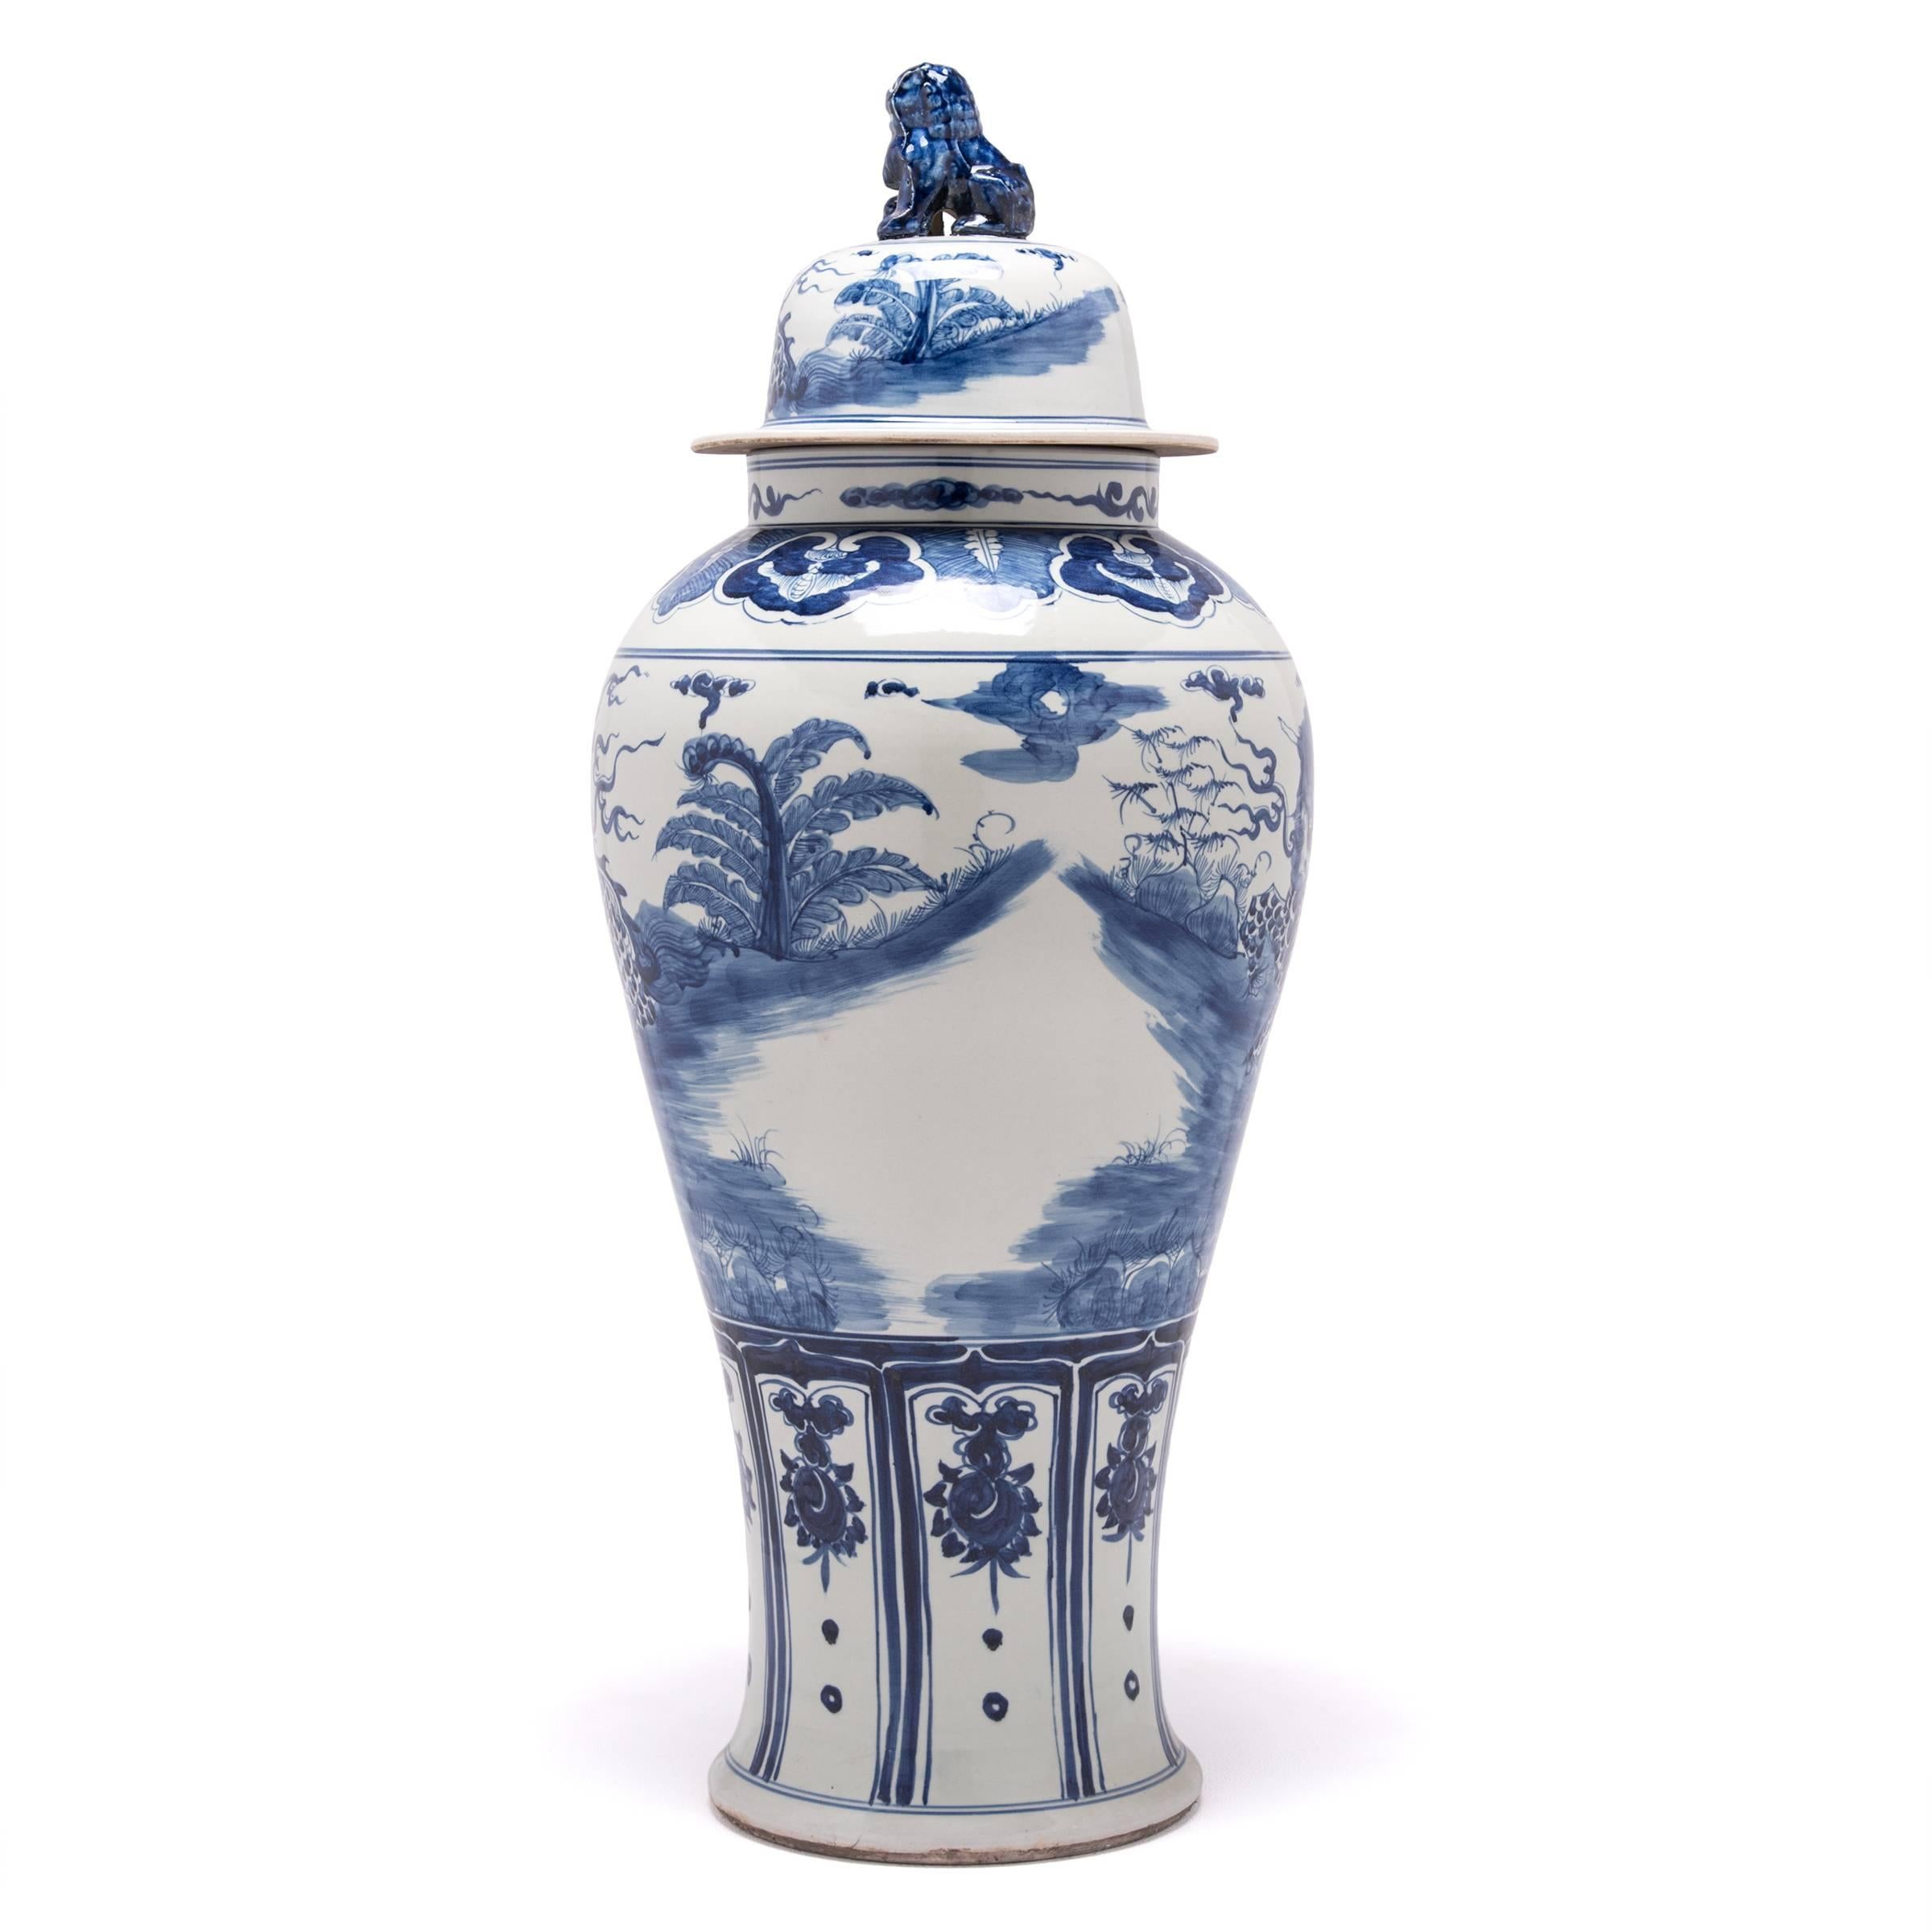 Qilin, Chinese mythical creatures symbolizing magnificence, joy, and benevolence, dominate the decoration of this hand-painted porcelain ginger jar. Chinese blue-and-white ceramics have inspired ceramists worldwide since cobalt was first introduced